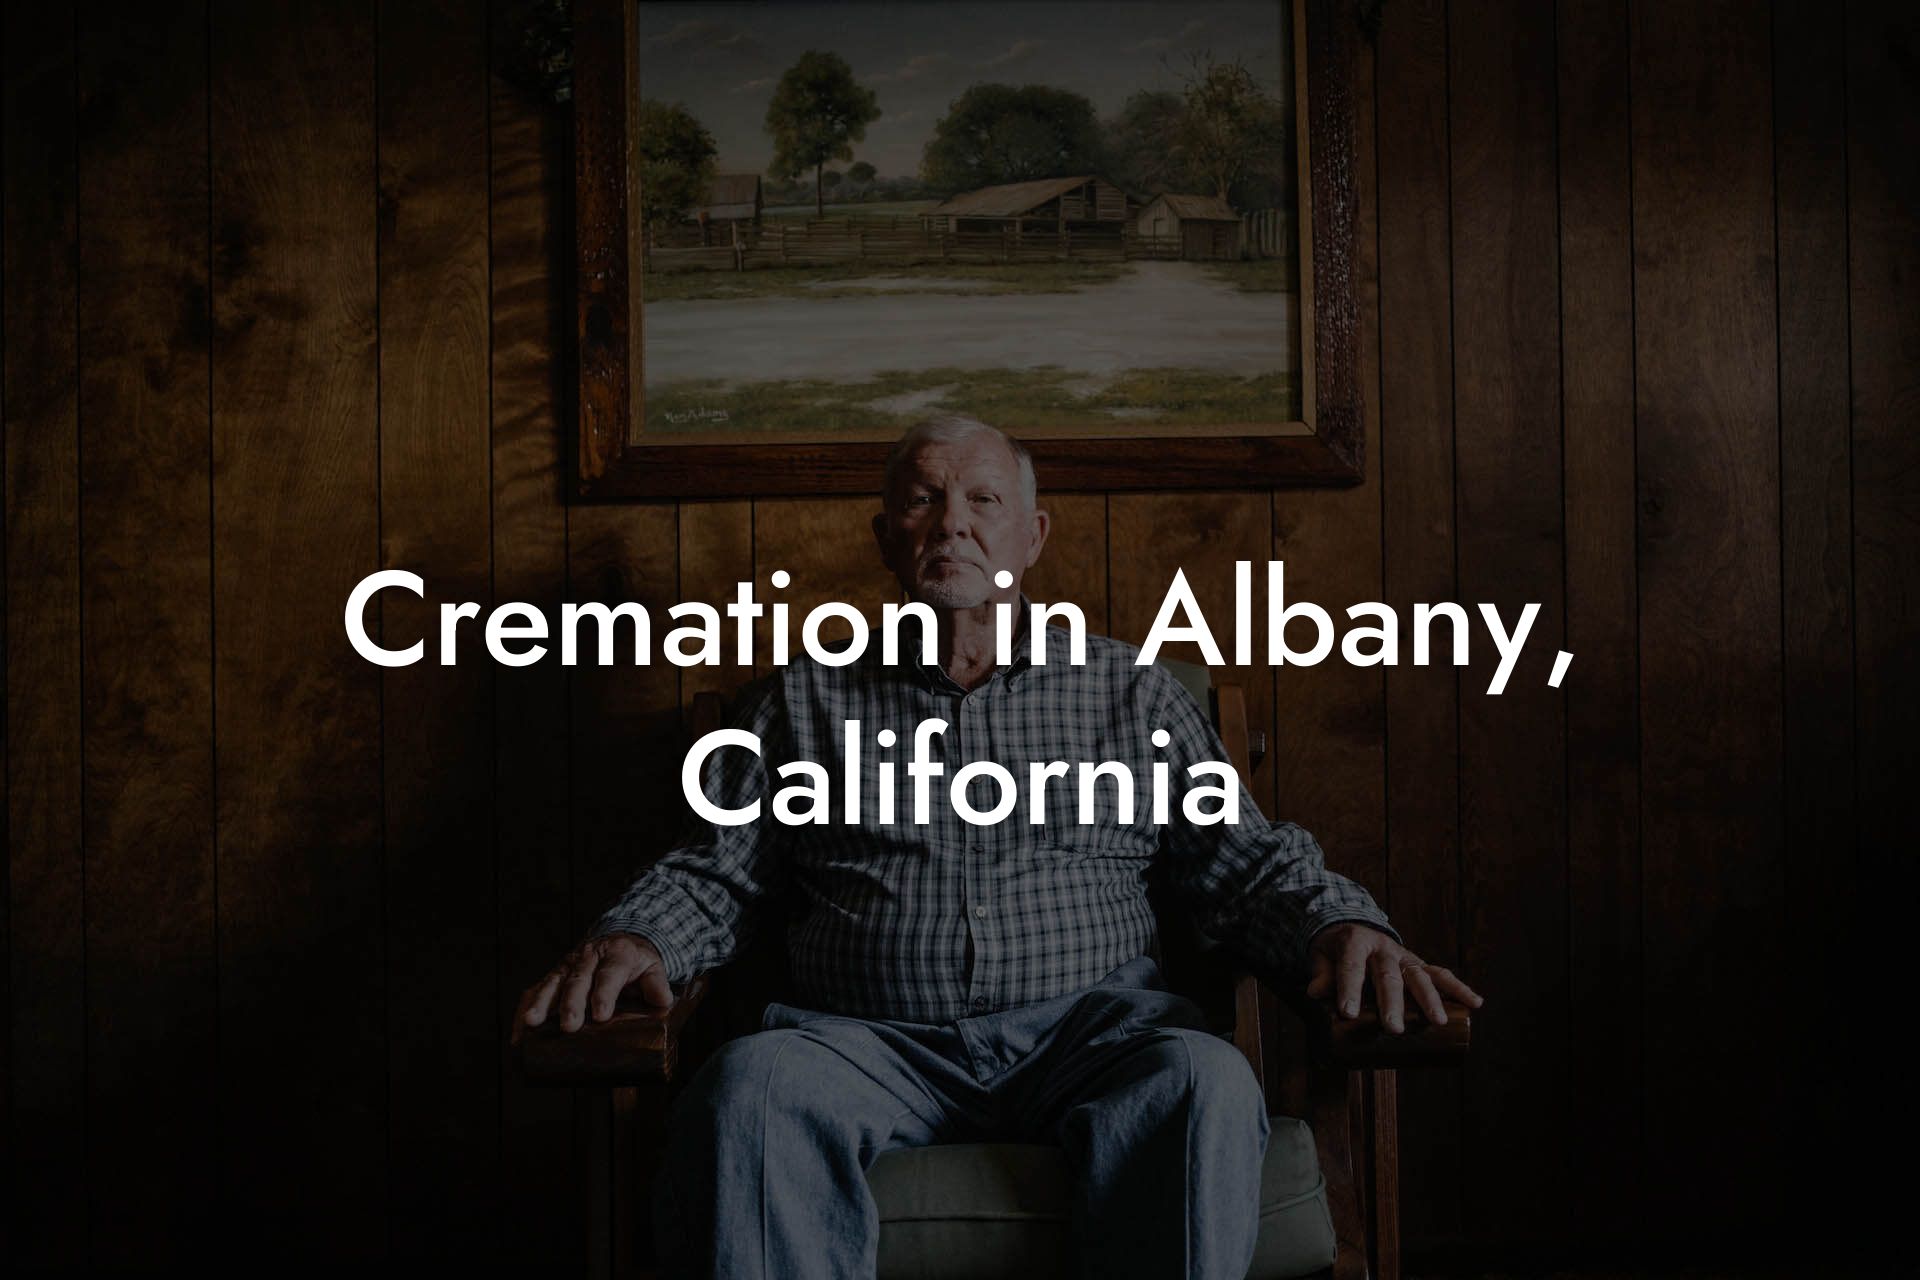 Cremation in Albany, California